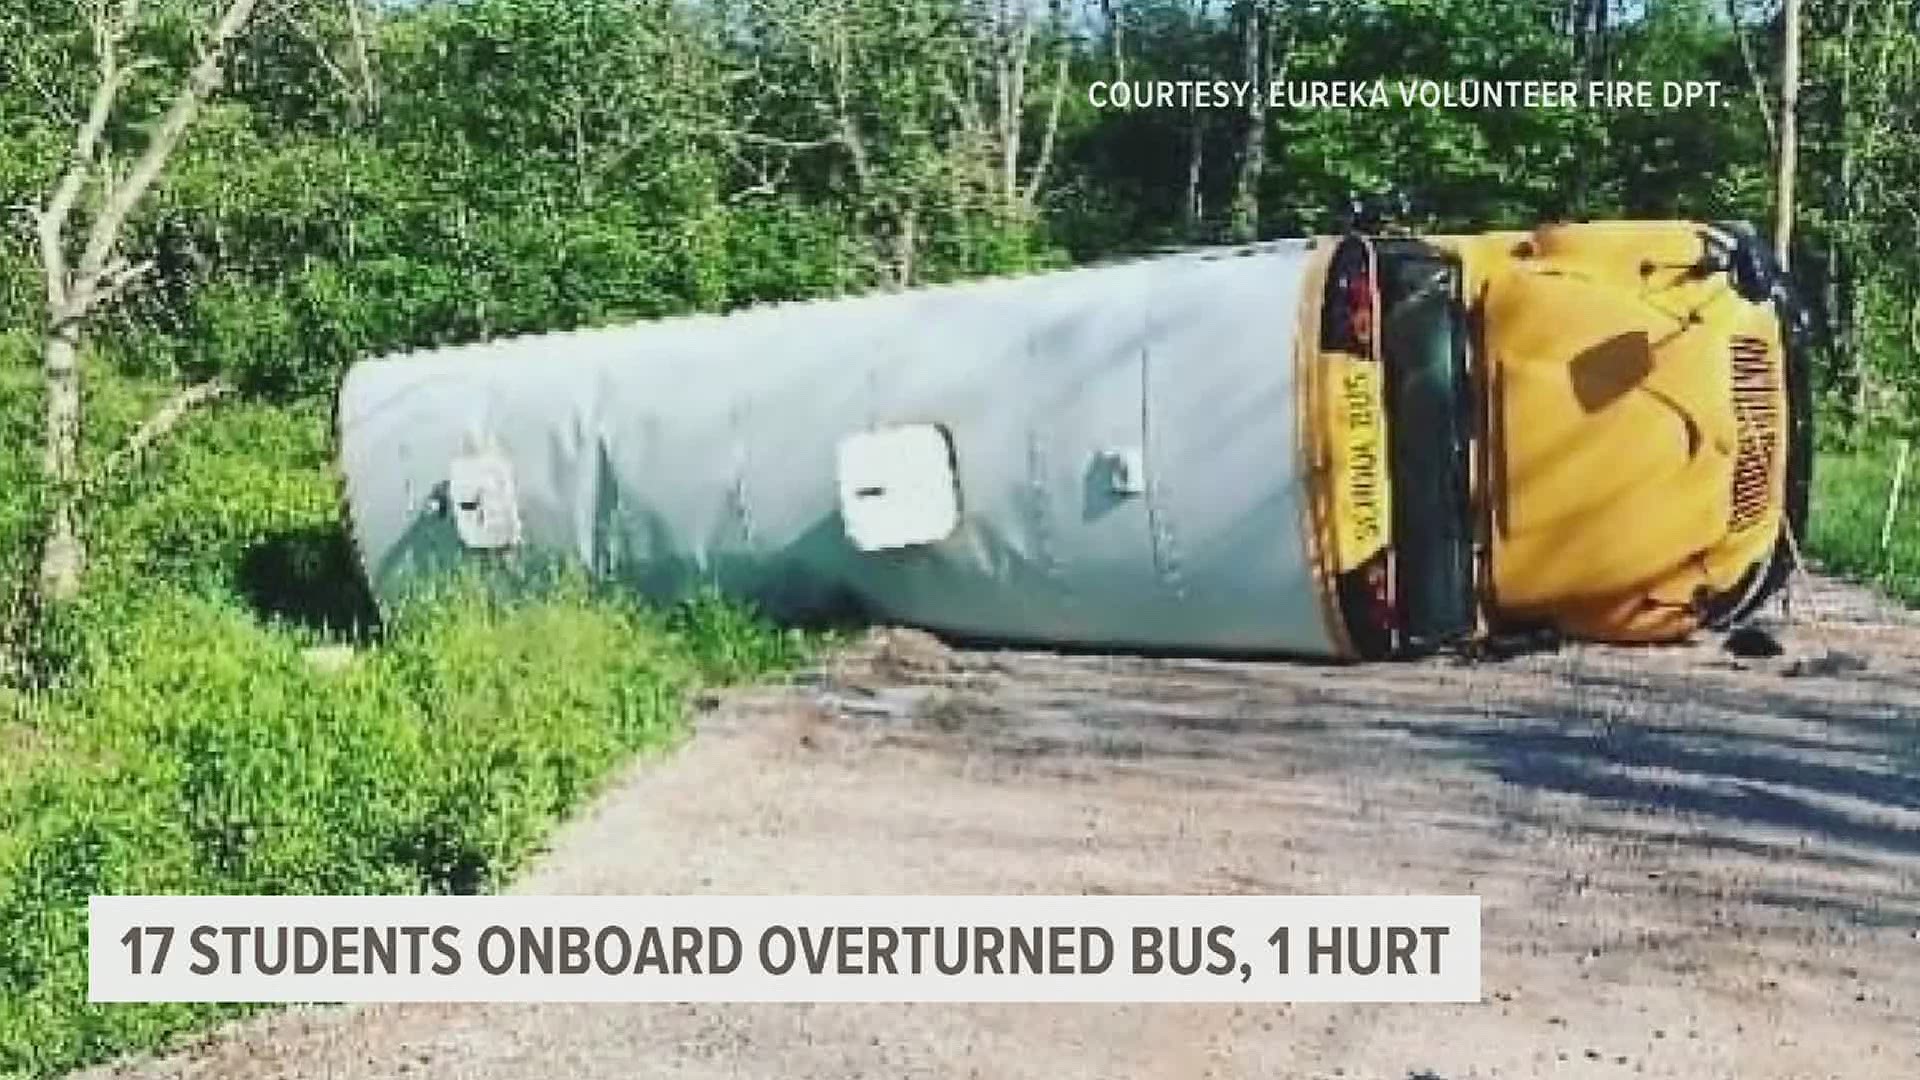 The bus company confirms the driver was on an unauthorized route and is no longer employed